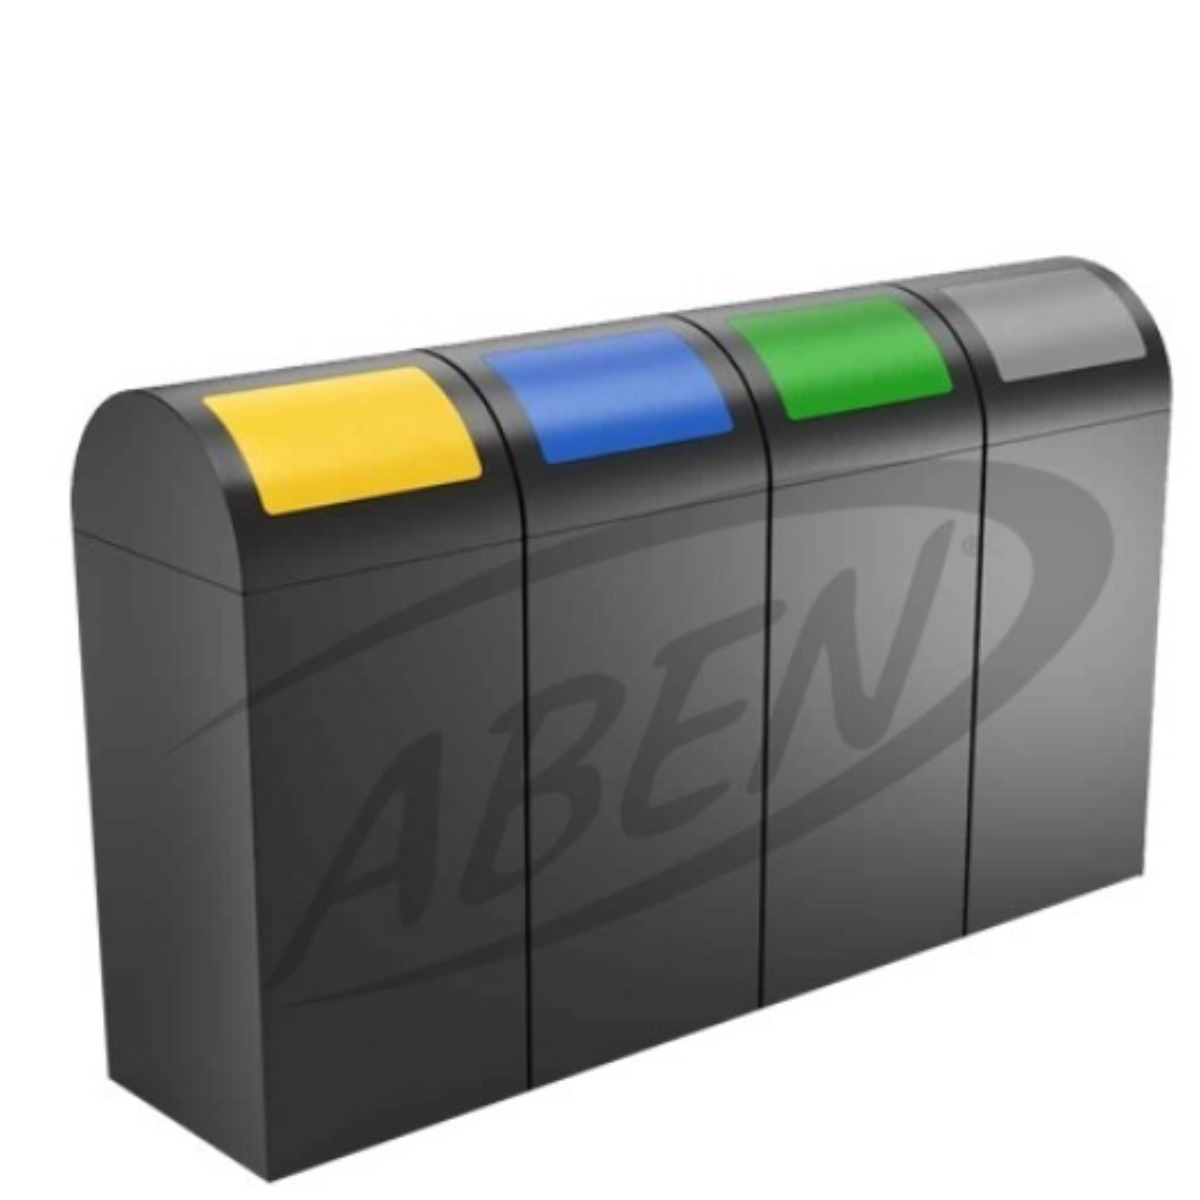 AB-761 4’Part Recycle Bin